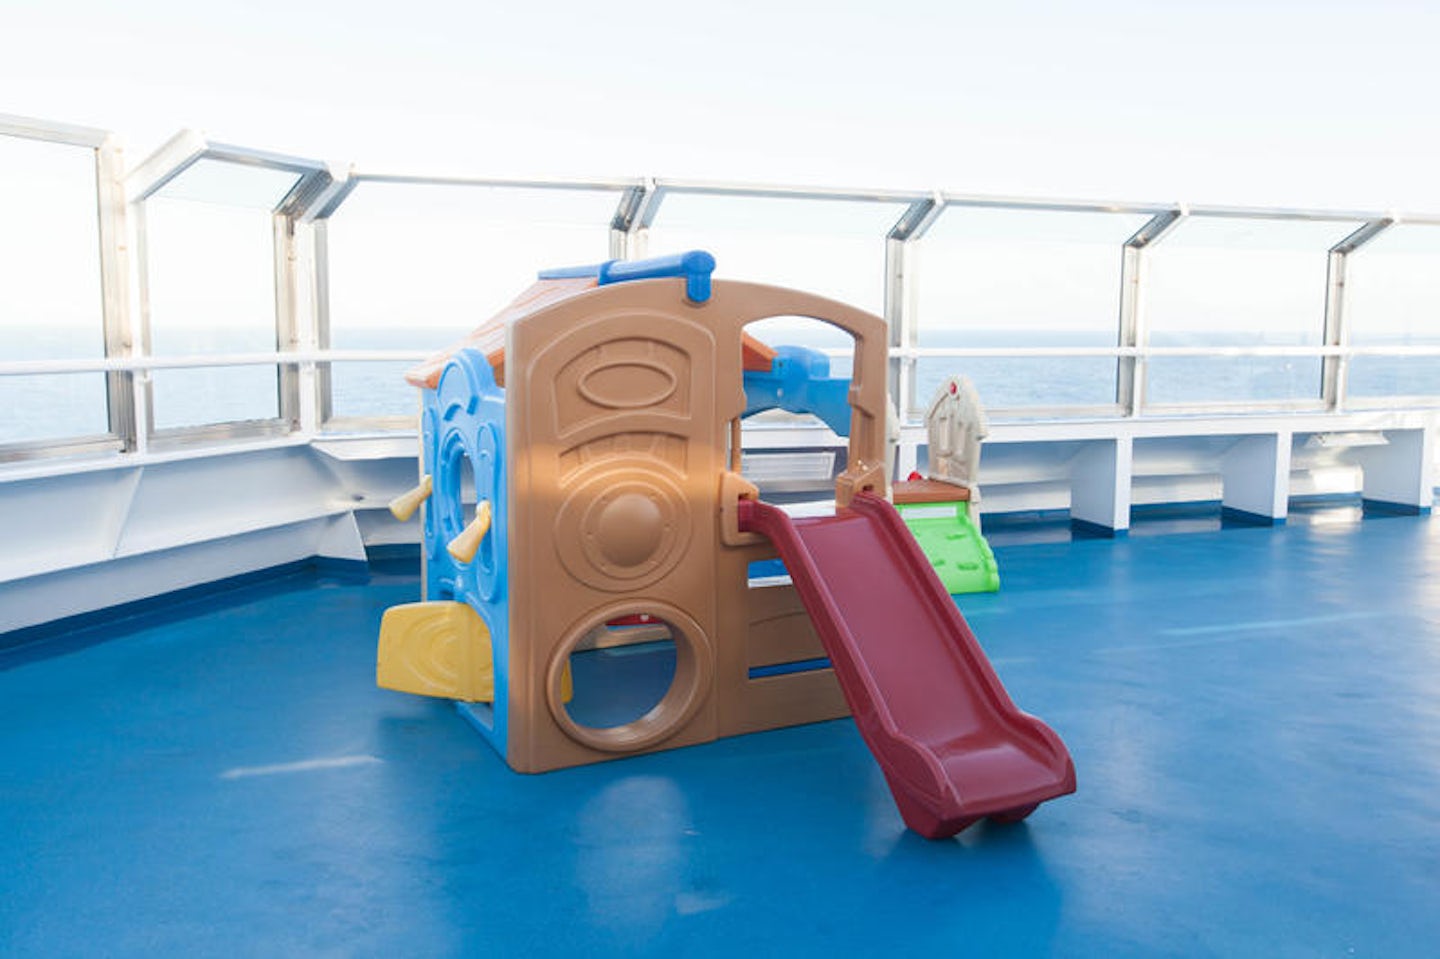 Camp Ocean on Carnival Conquest